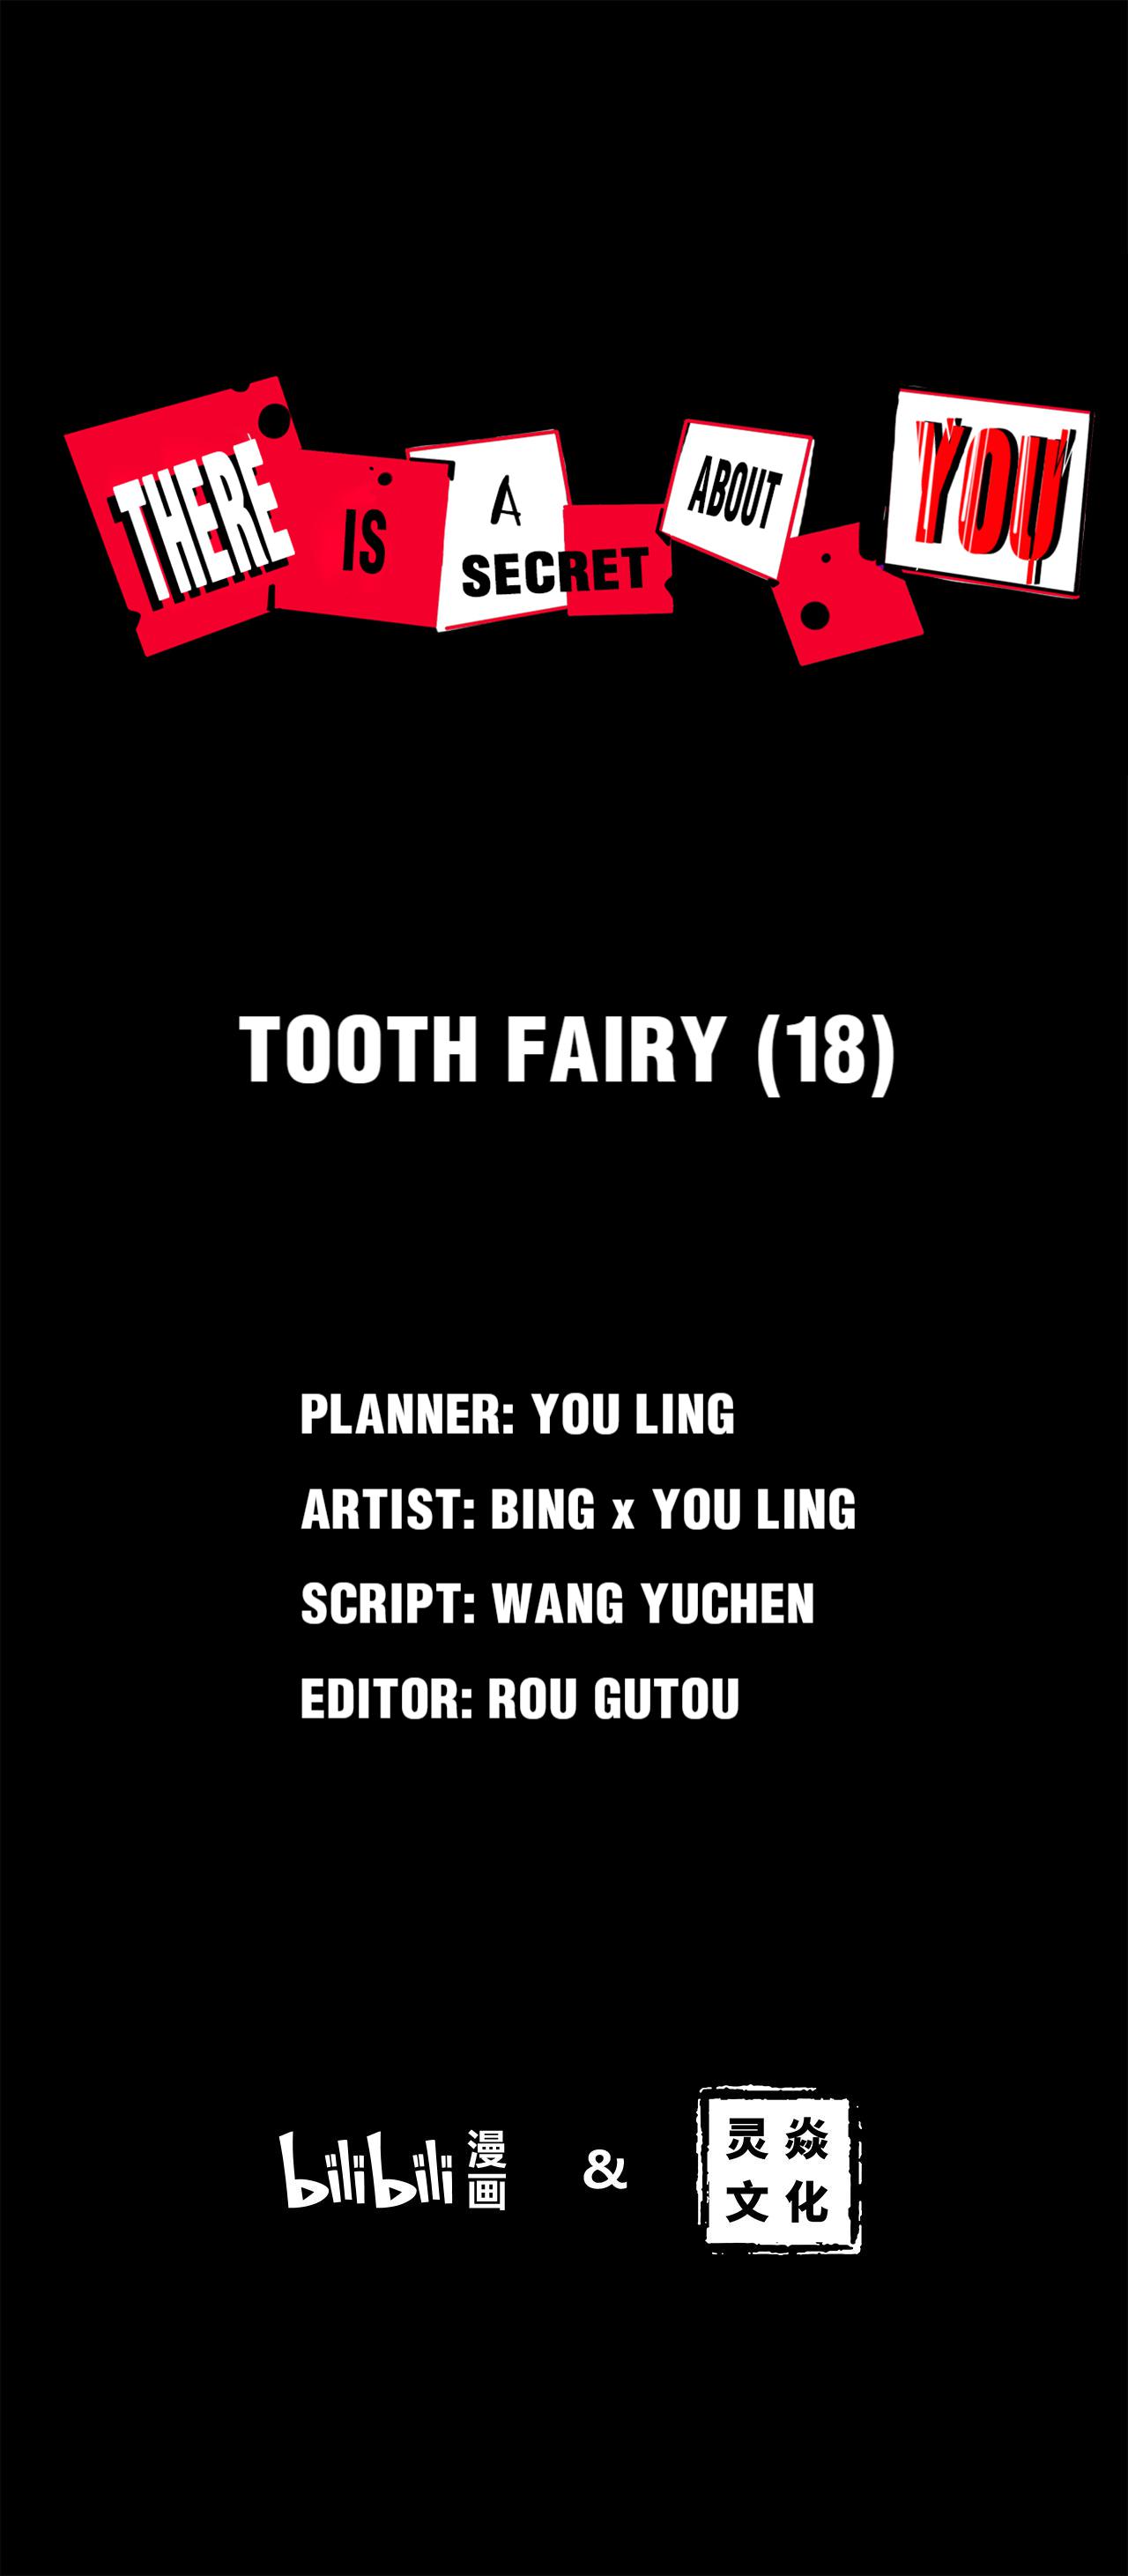 There is a Secret About You 18 Tooth Fairy （18）